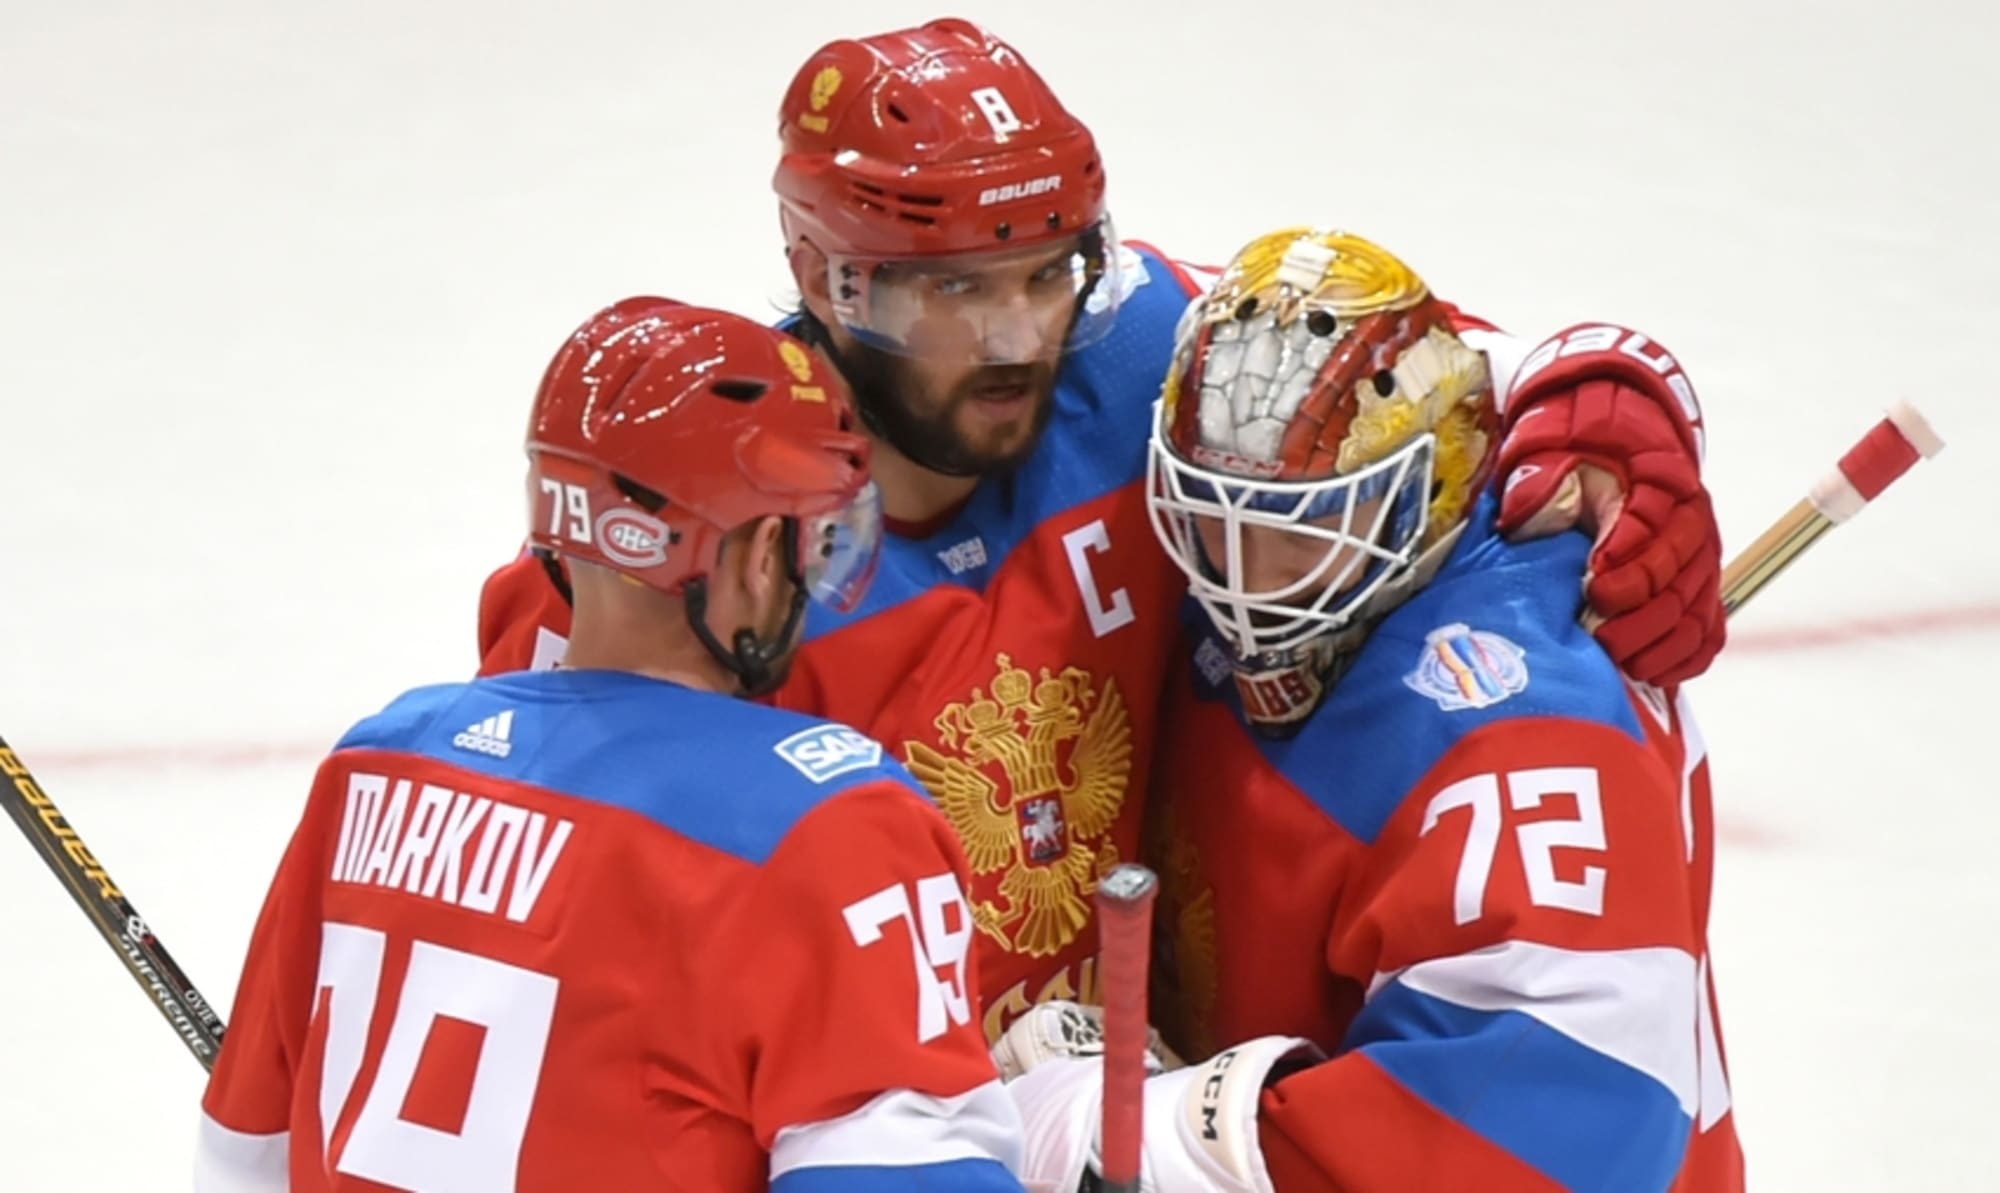 World Cup of Hockey How to watch Russia vs Canada